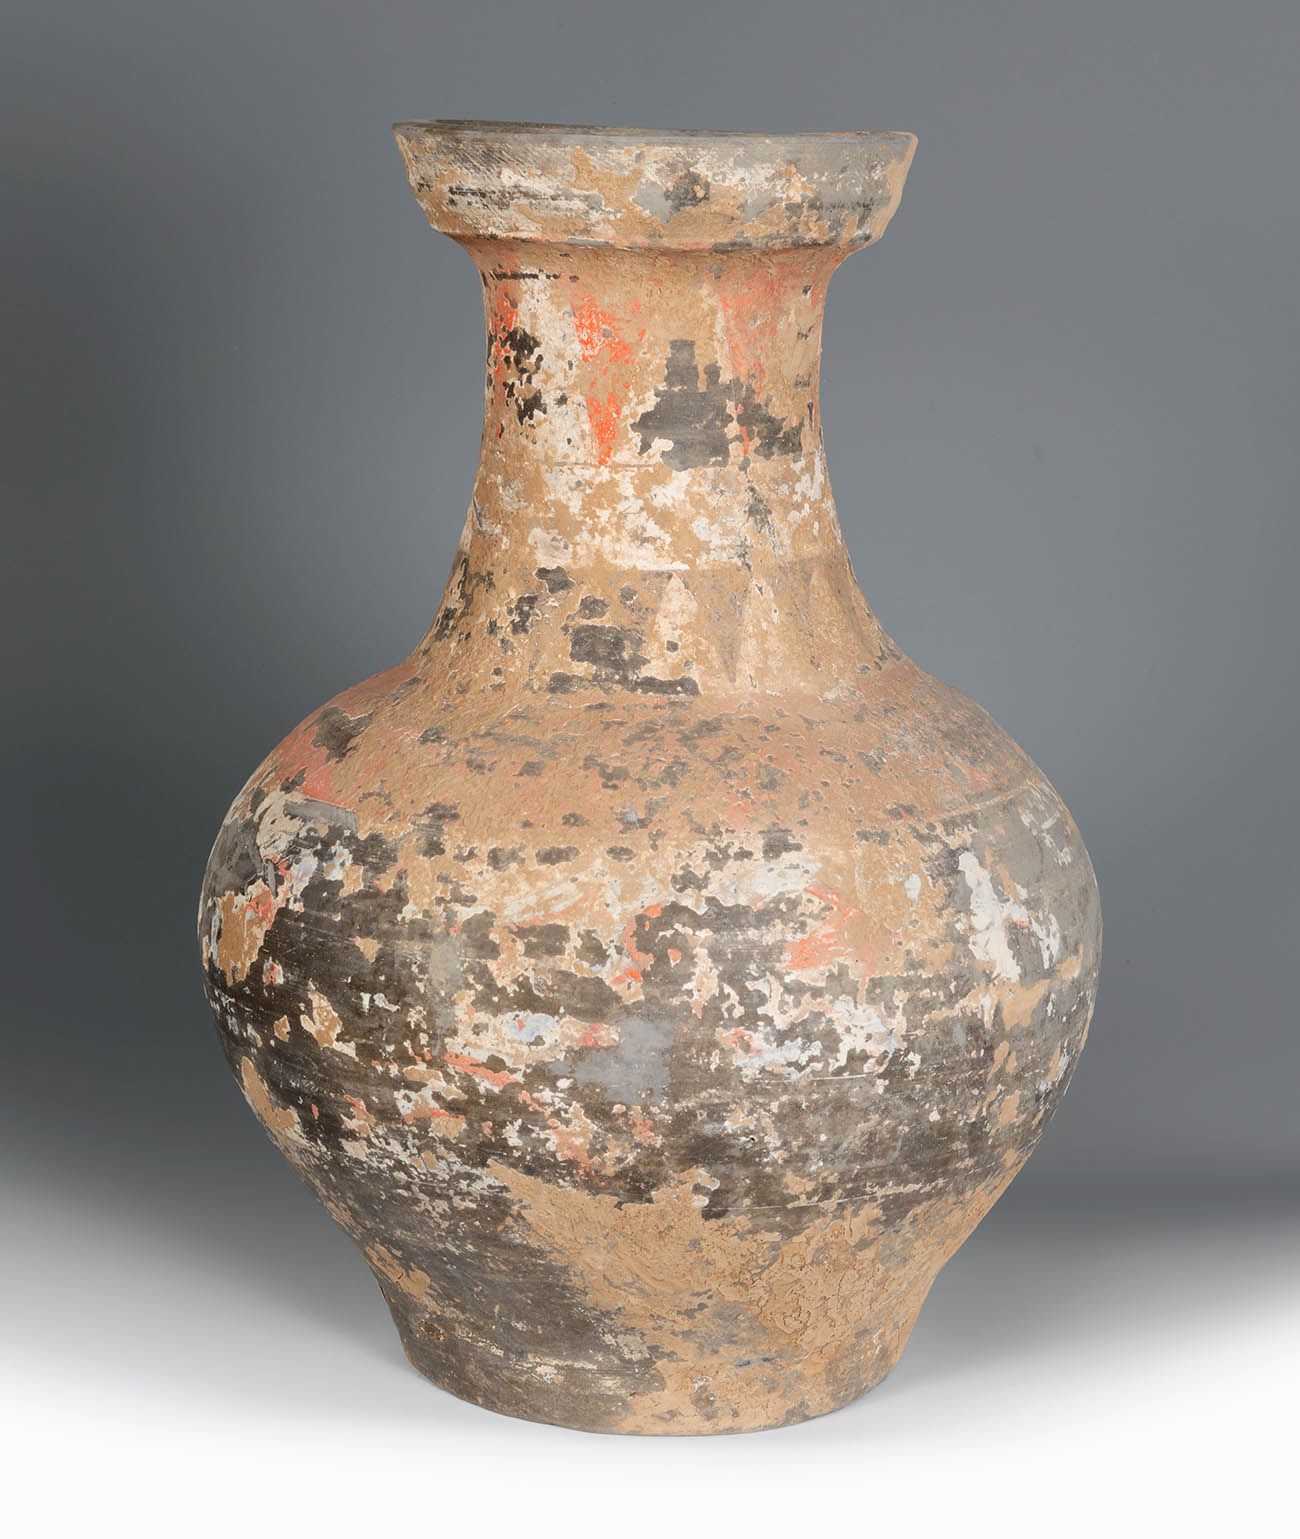 Null Vessel. China, Han Dynasty, 206 BC-AD 220.
Polychrome terracotta.
Size: 39 &hellip;